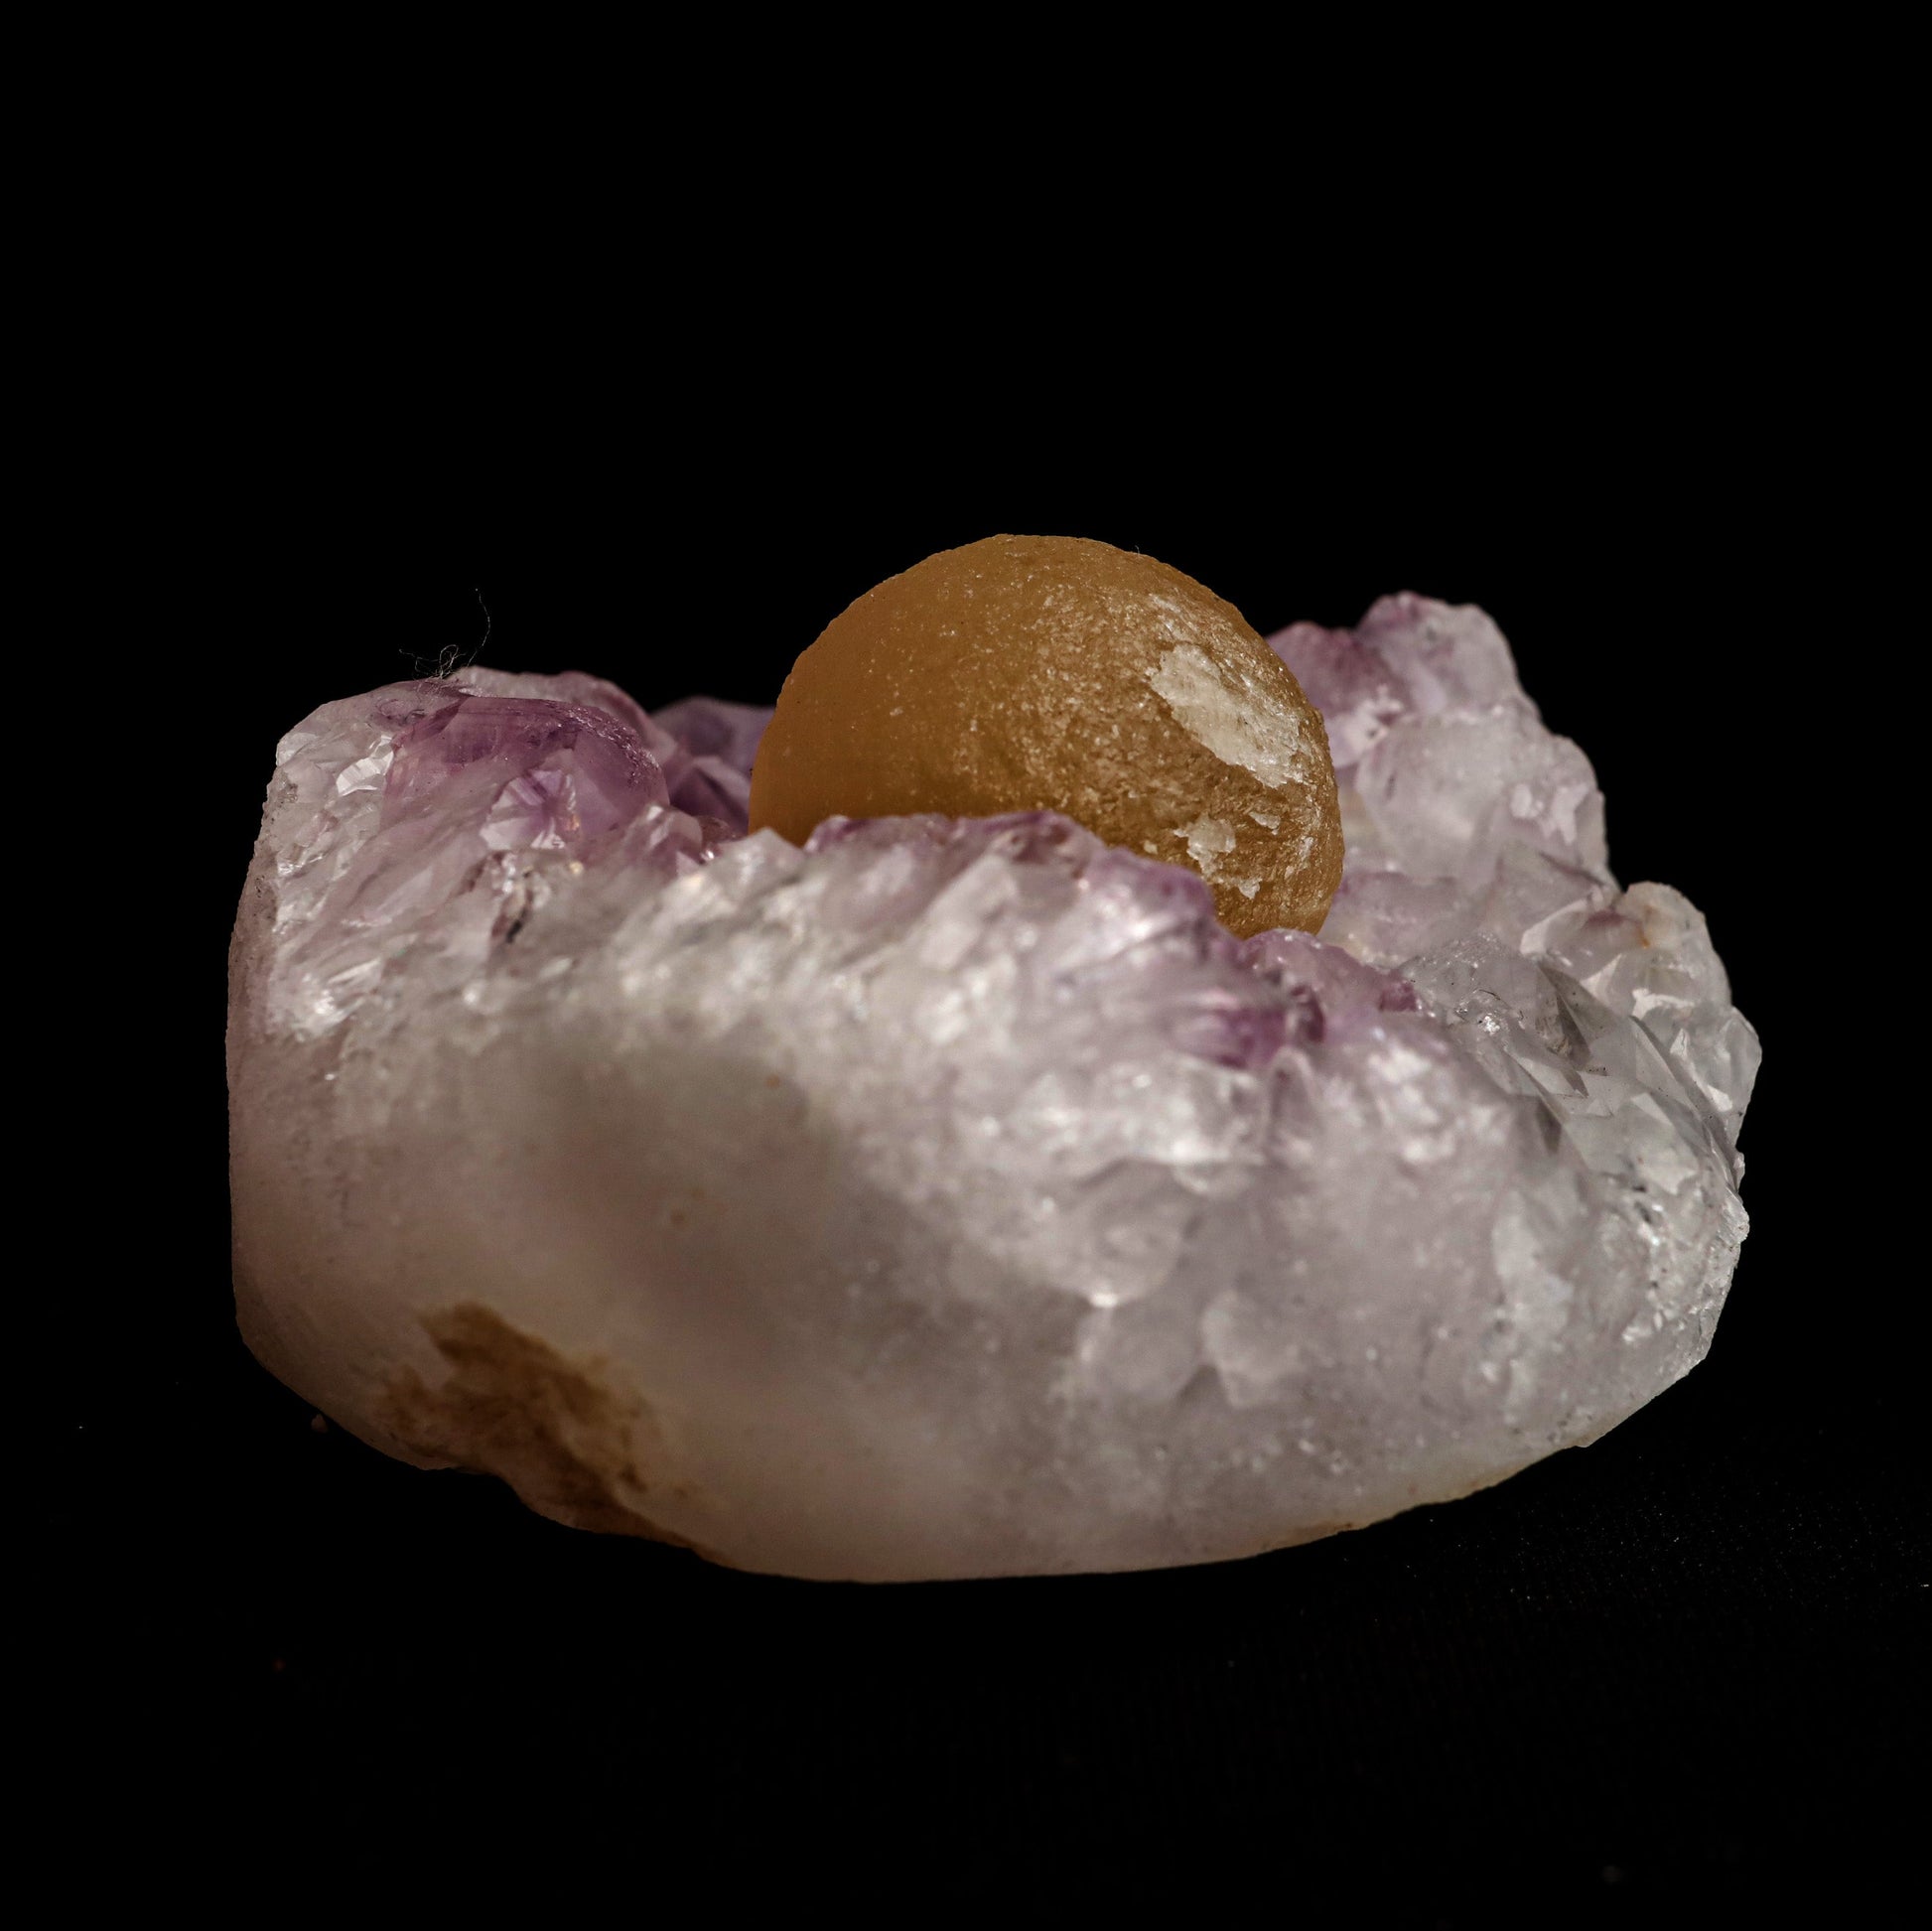 Fluorite Botryoidal Shaded on Amethyst Natural Mineral Specimen # B 5…  https://www.superbminerals.us/products/fluorite-botryoidal-shaded-on-amethyst-natural-mineral-specimen-b-5067  Features: A prominent botryoidal "ball" of Fluorite perches on light purple coloured Amethyst and soft lilac coloured Chalcedony matrix in this specimen. The Fluorite has a gorgeous golden tone throughout, and when the "ball" is lighted, the colour GLOWS. A supplementary Fluorite sphere at a lesser size 